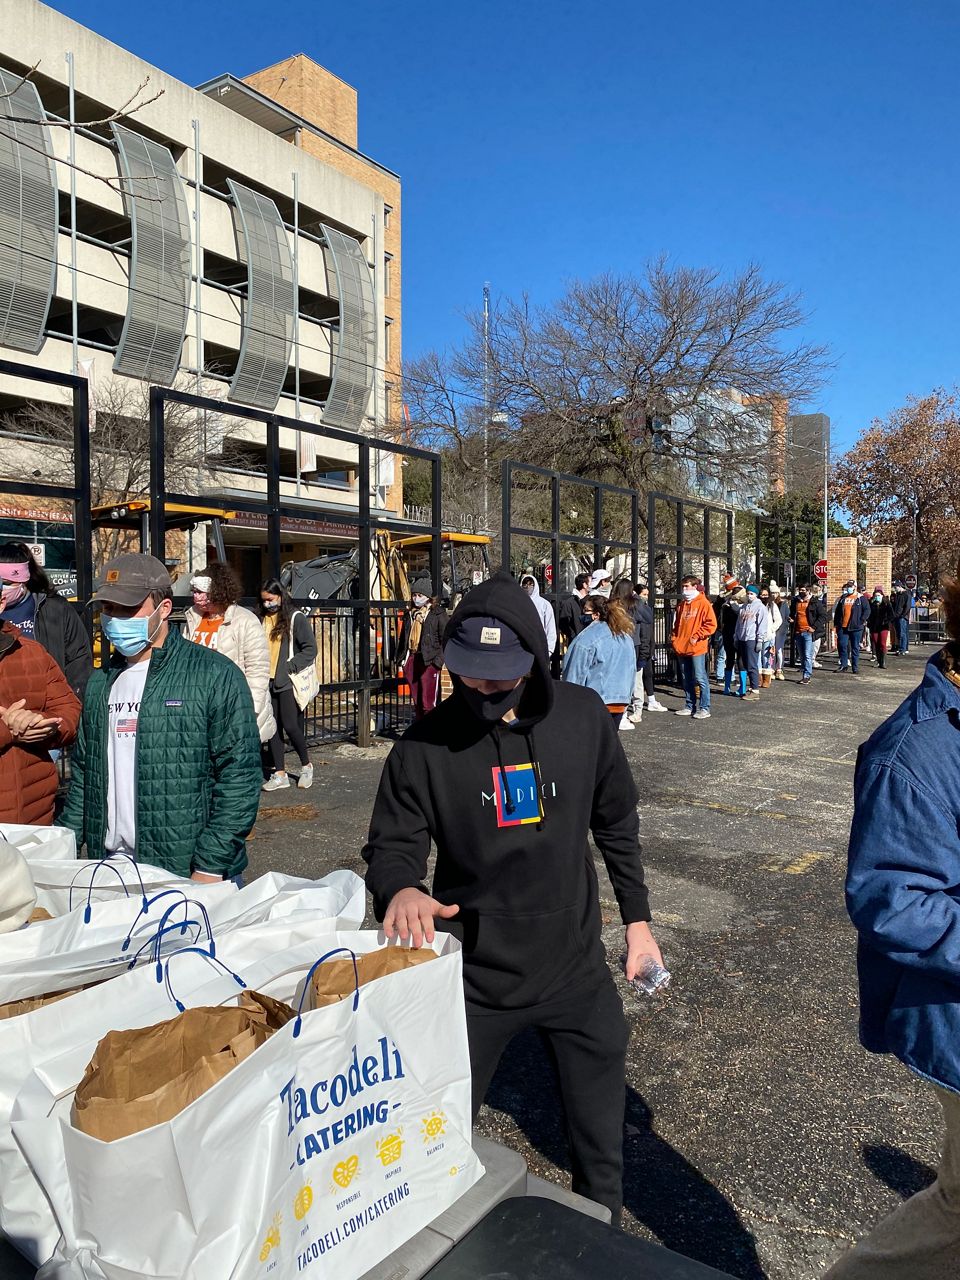 Students are treated to tacos on the campus of University of Texas at Austin in this image from February 20, 2021. (Travis Recek/Spectrum News 1)